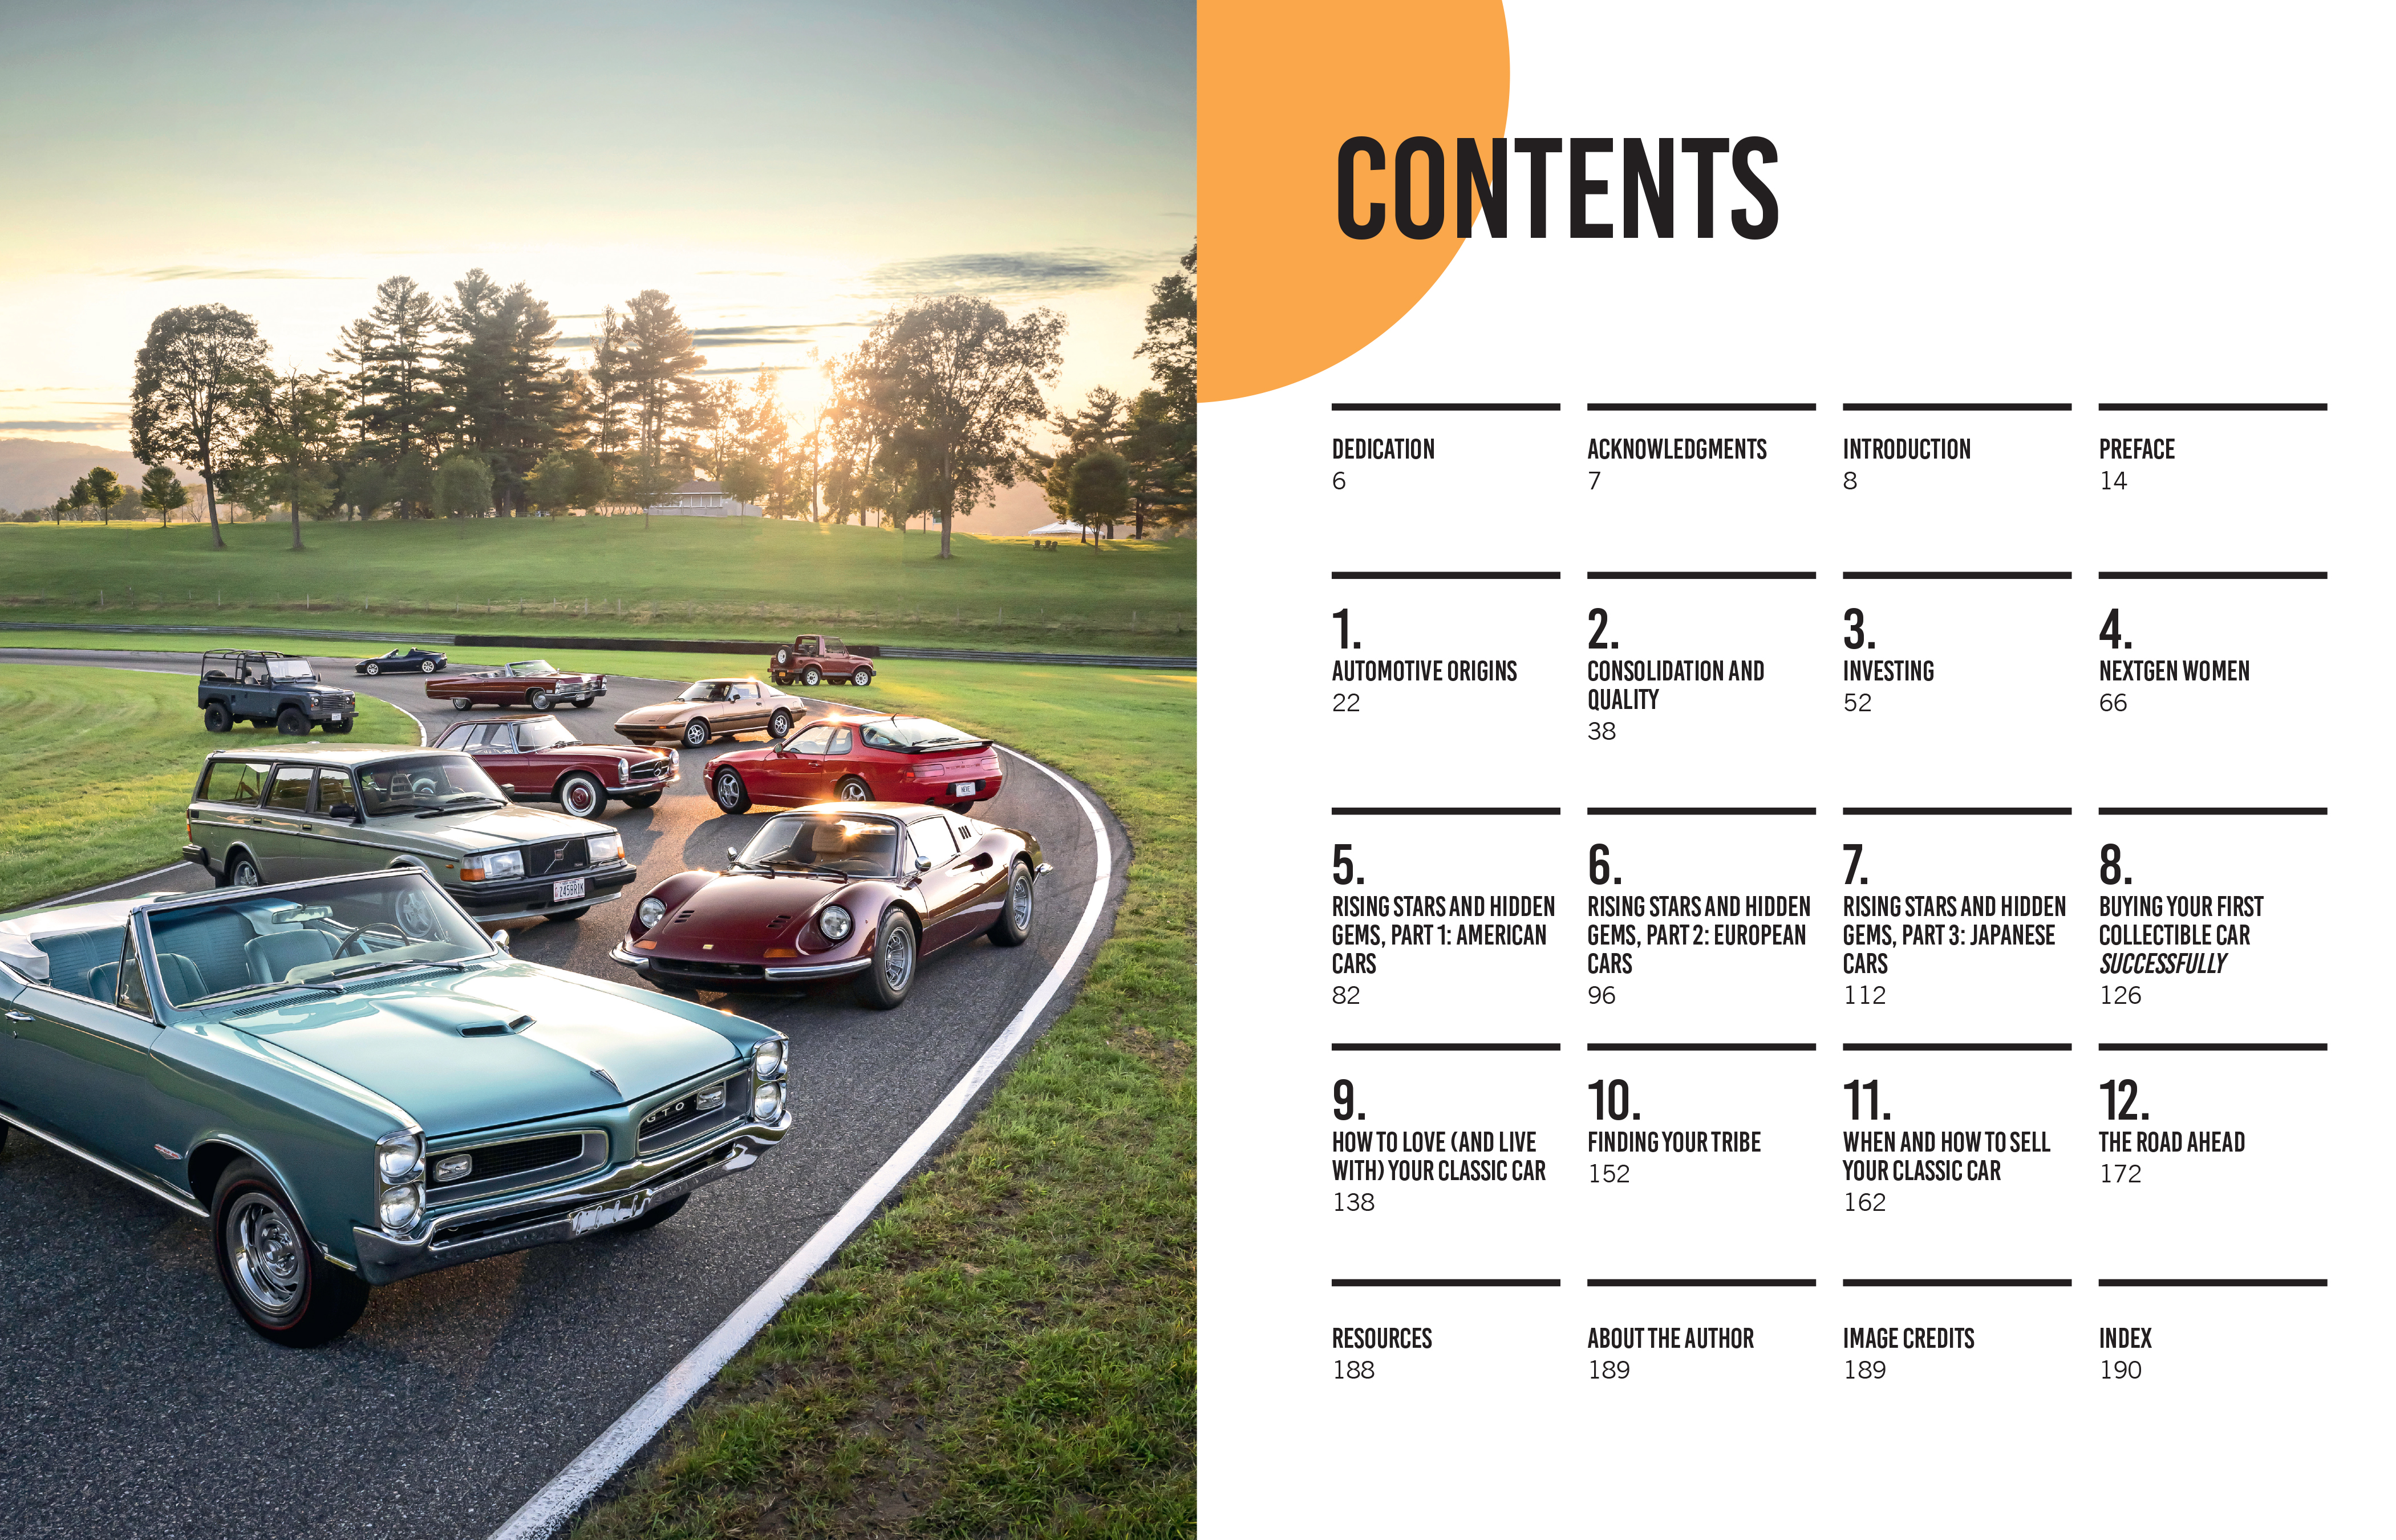 The NextGen Guide to Car Collecting